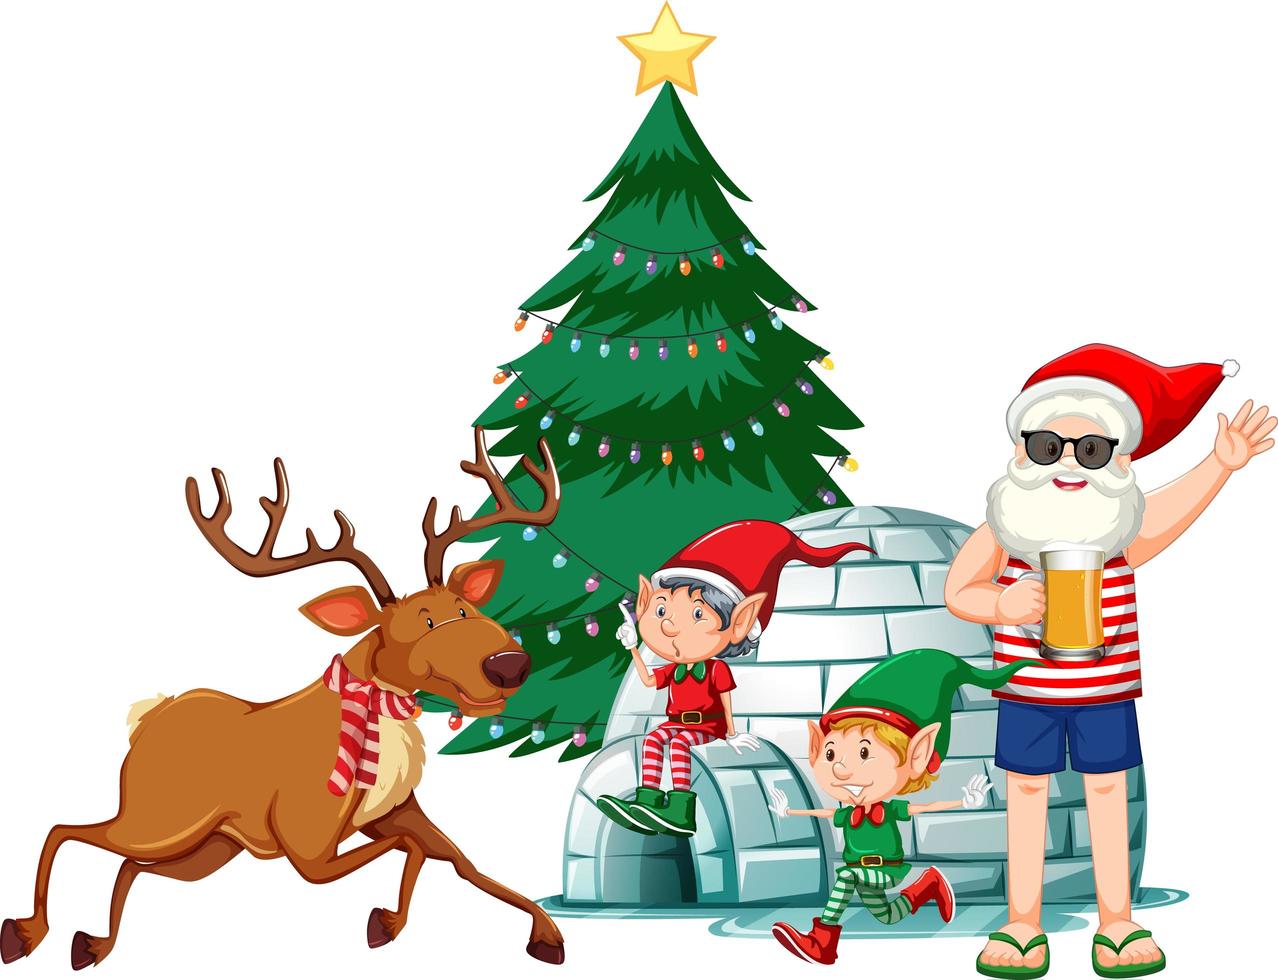 Santa Claus in summer costume with elf and raindeer on white background vector